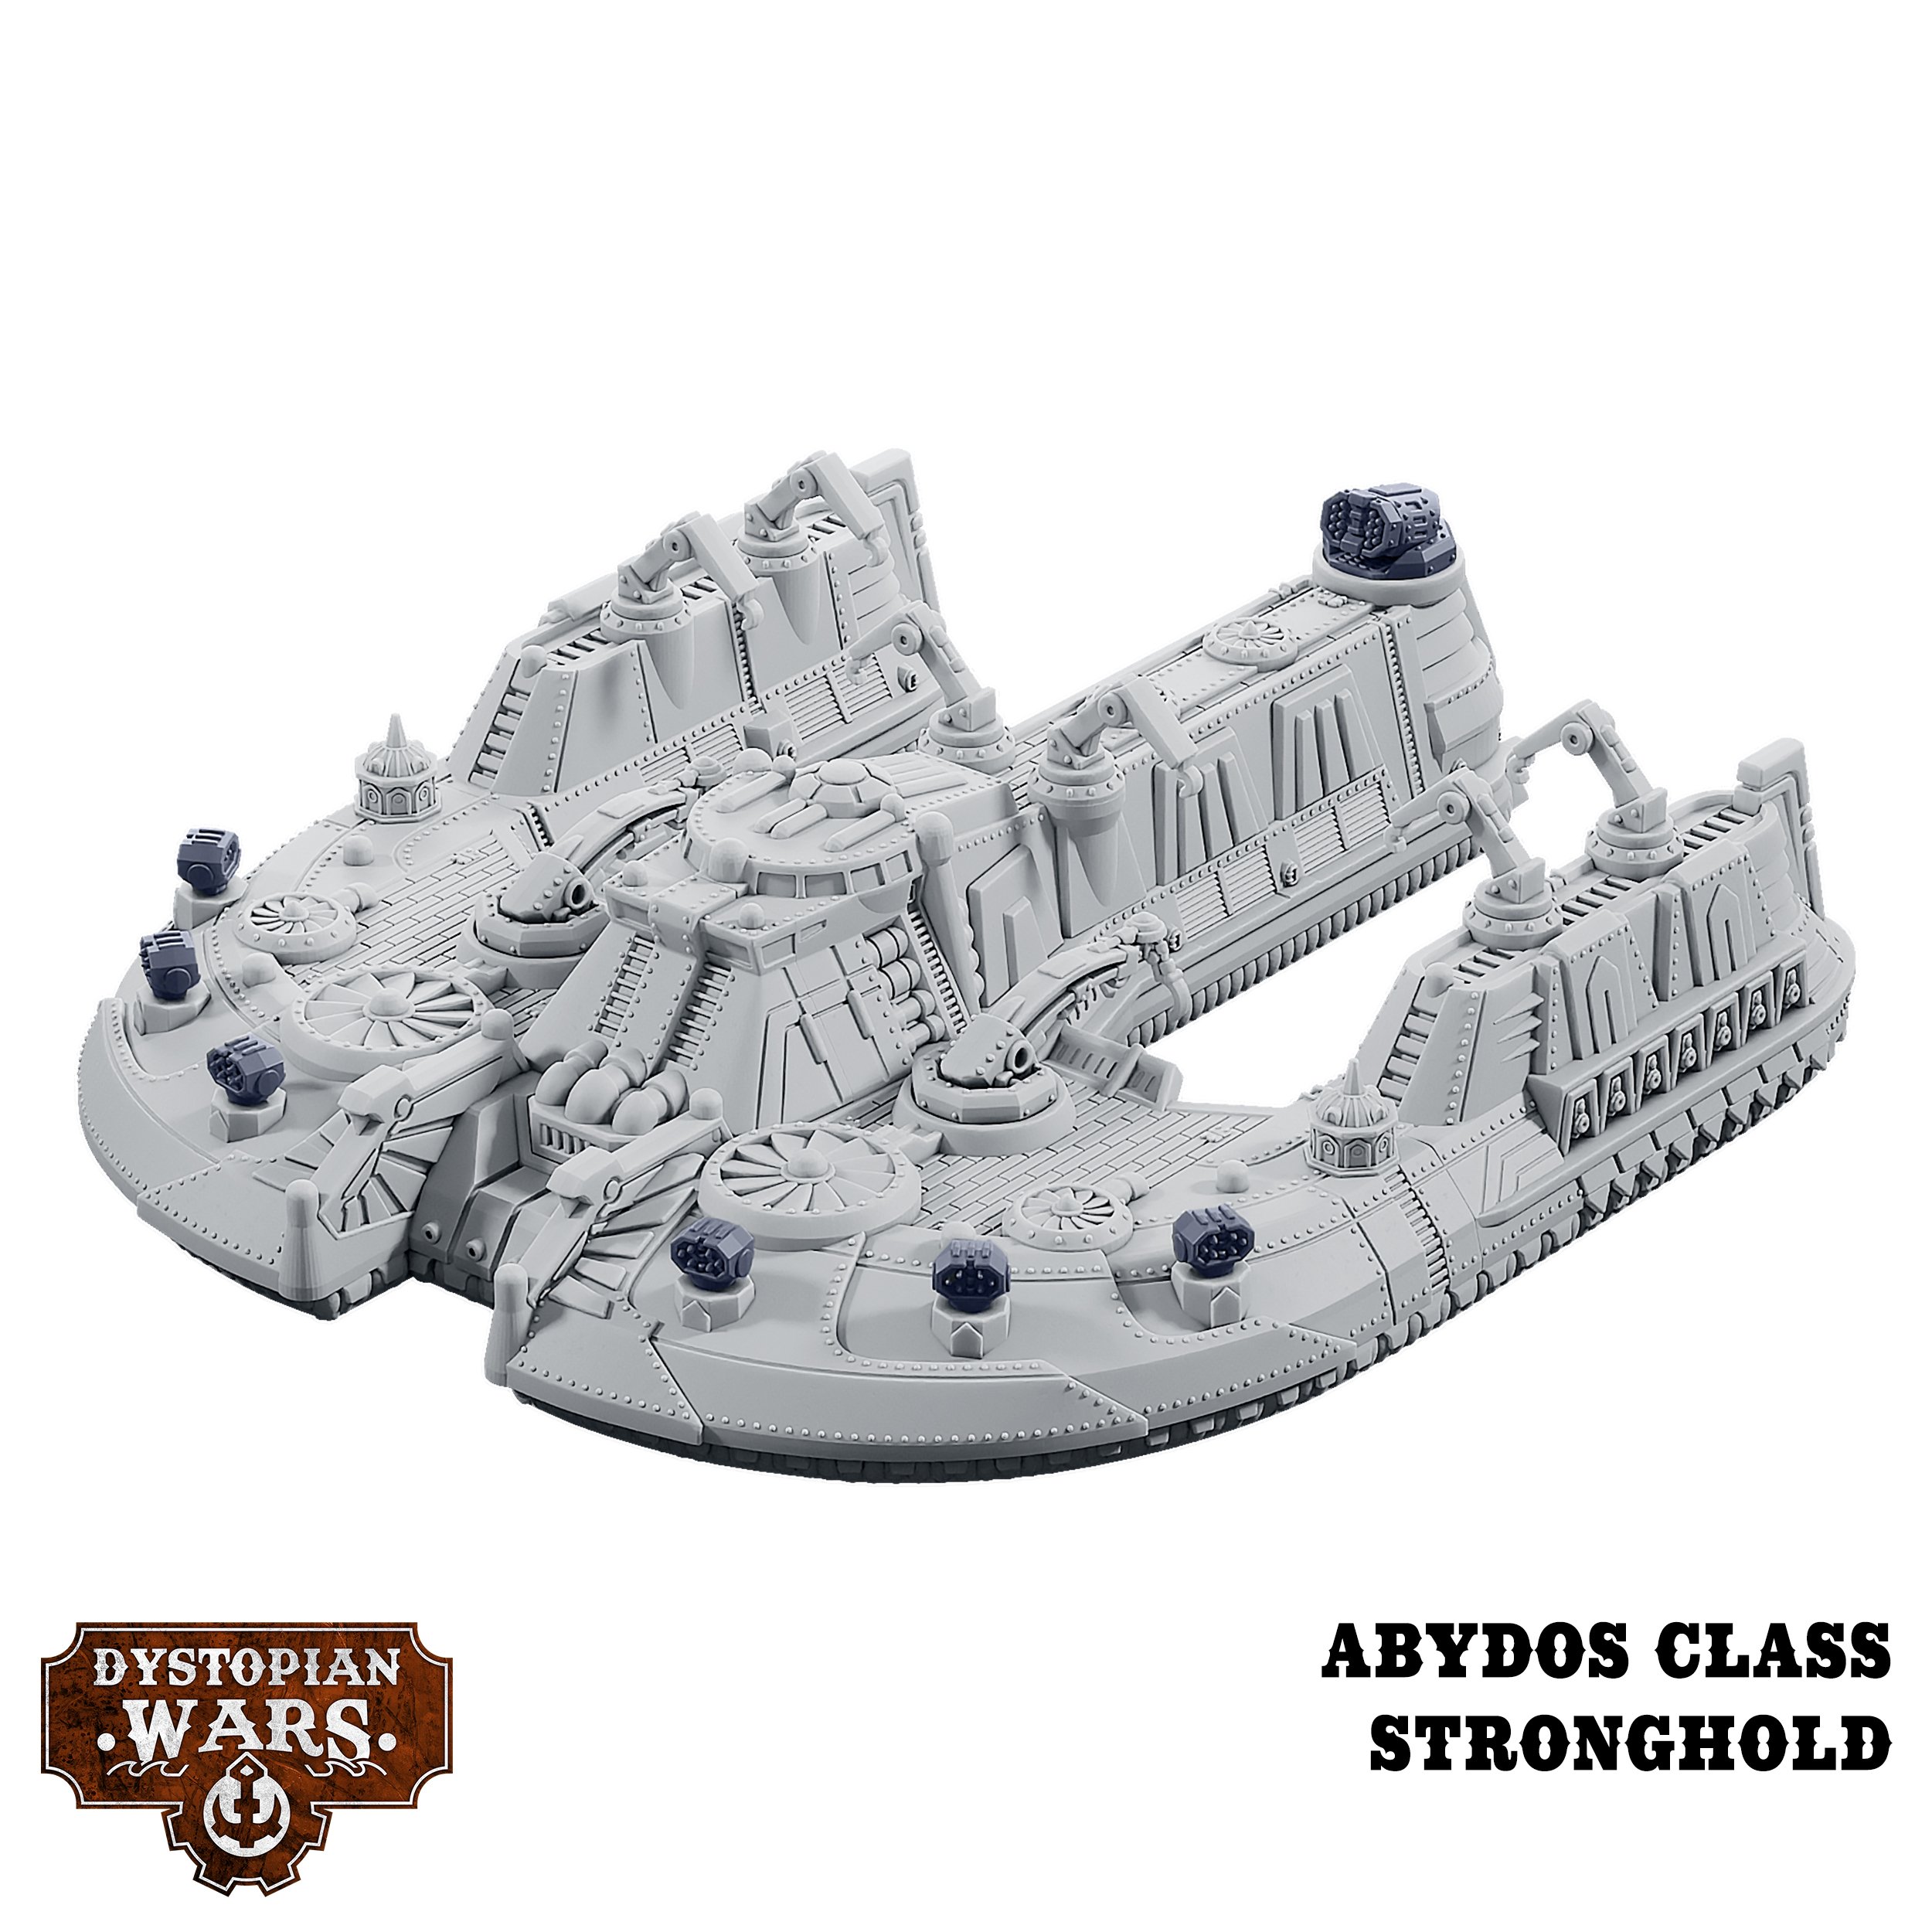 Abydos Class Stronghold - Dystopian Wars